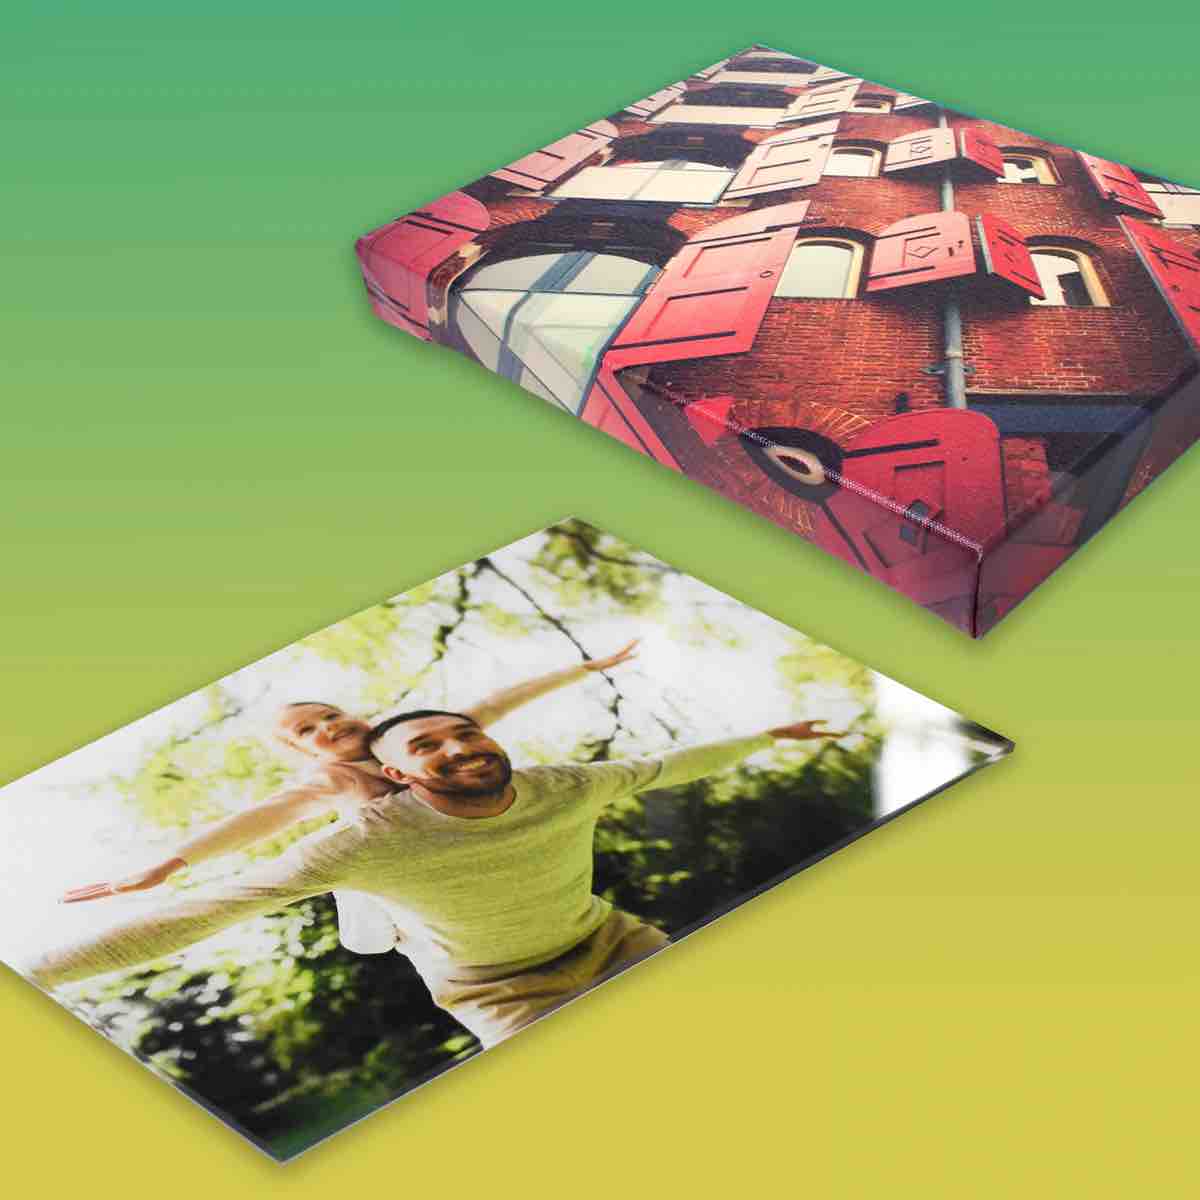 Differences Between Acrylic and Canvas Prints - Comparing Photo Art Products